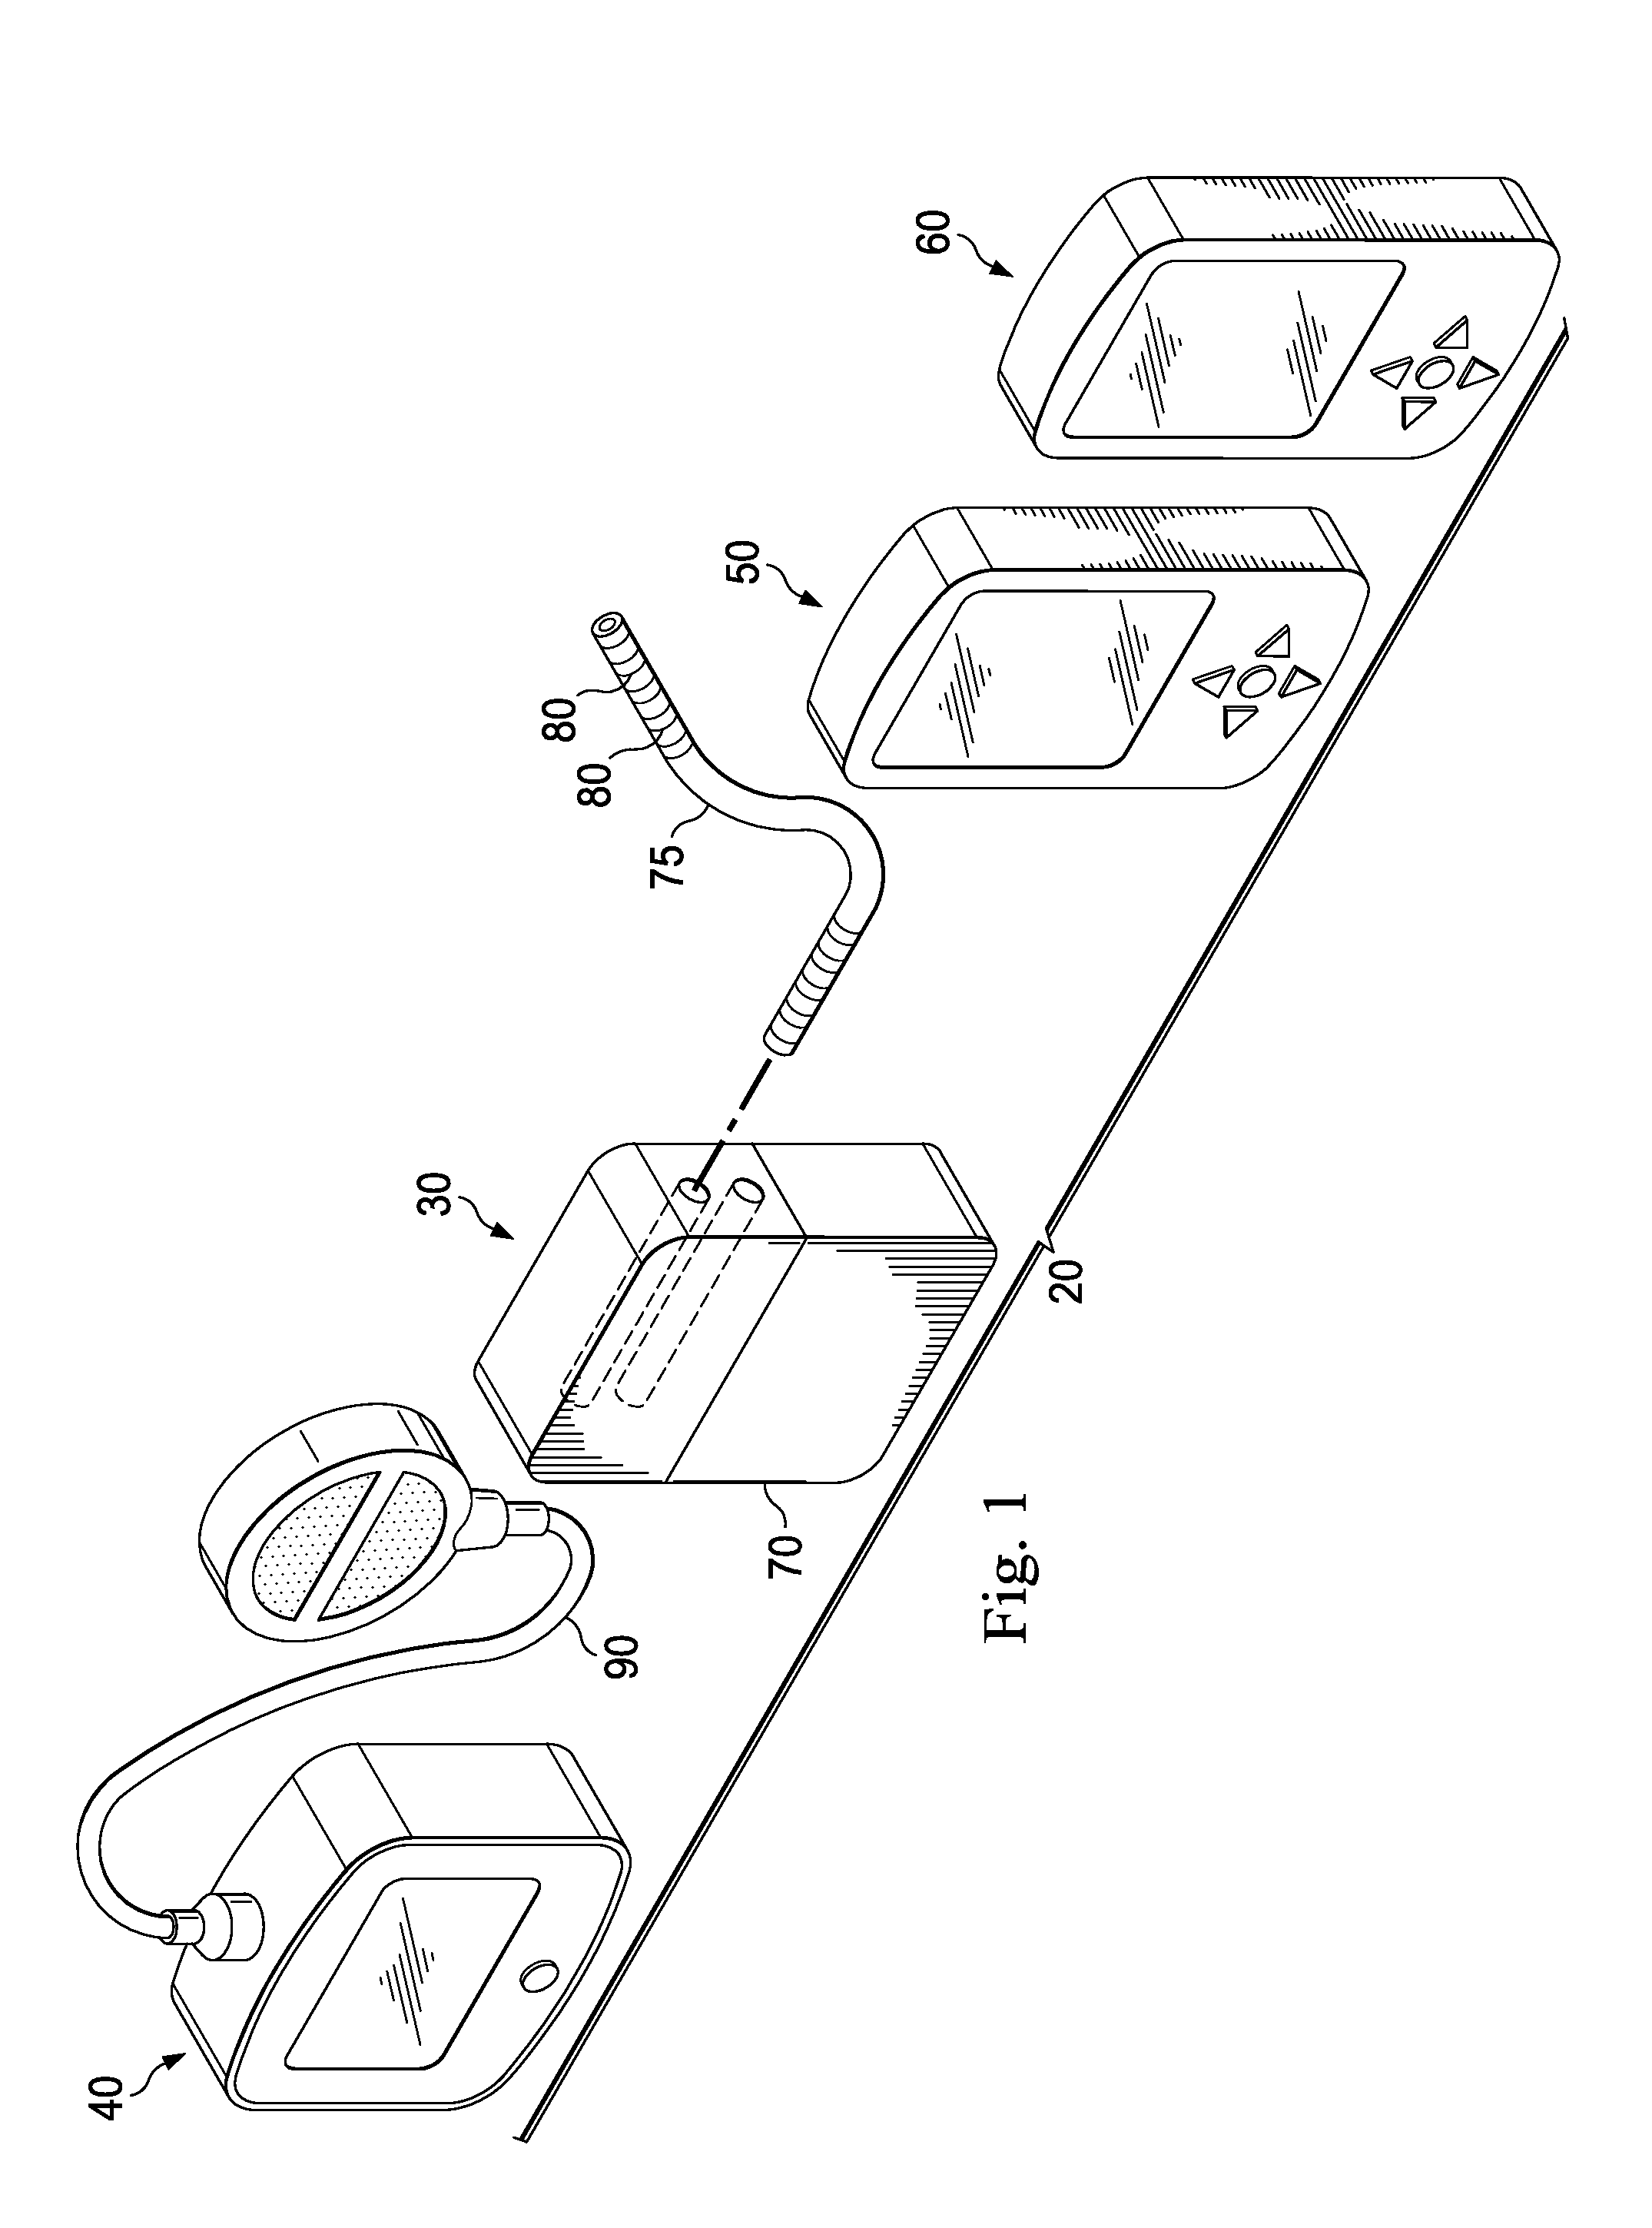 Method and System of Quick Neurostimulation Electrode Configuration and Positioning